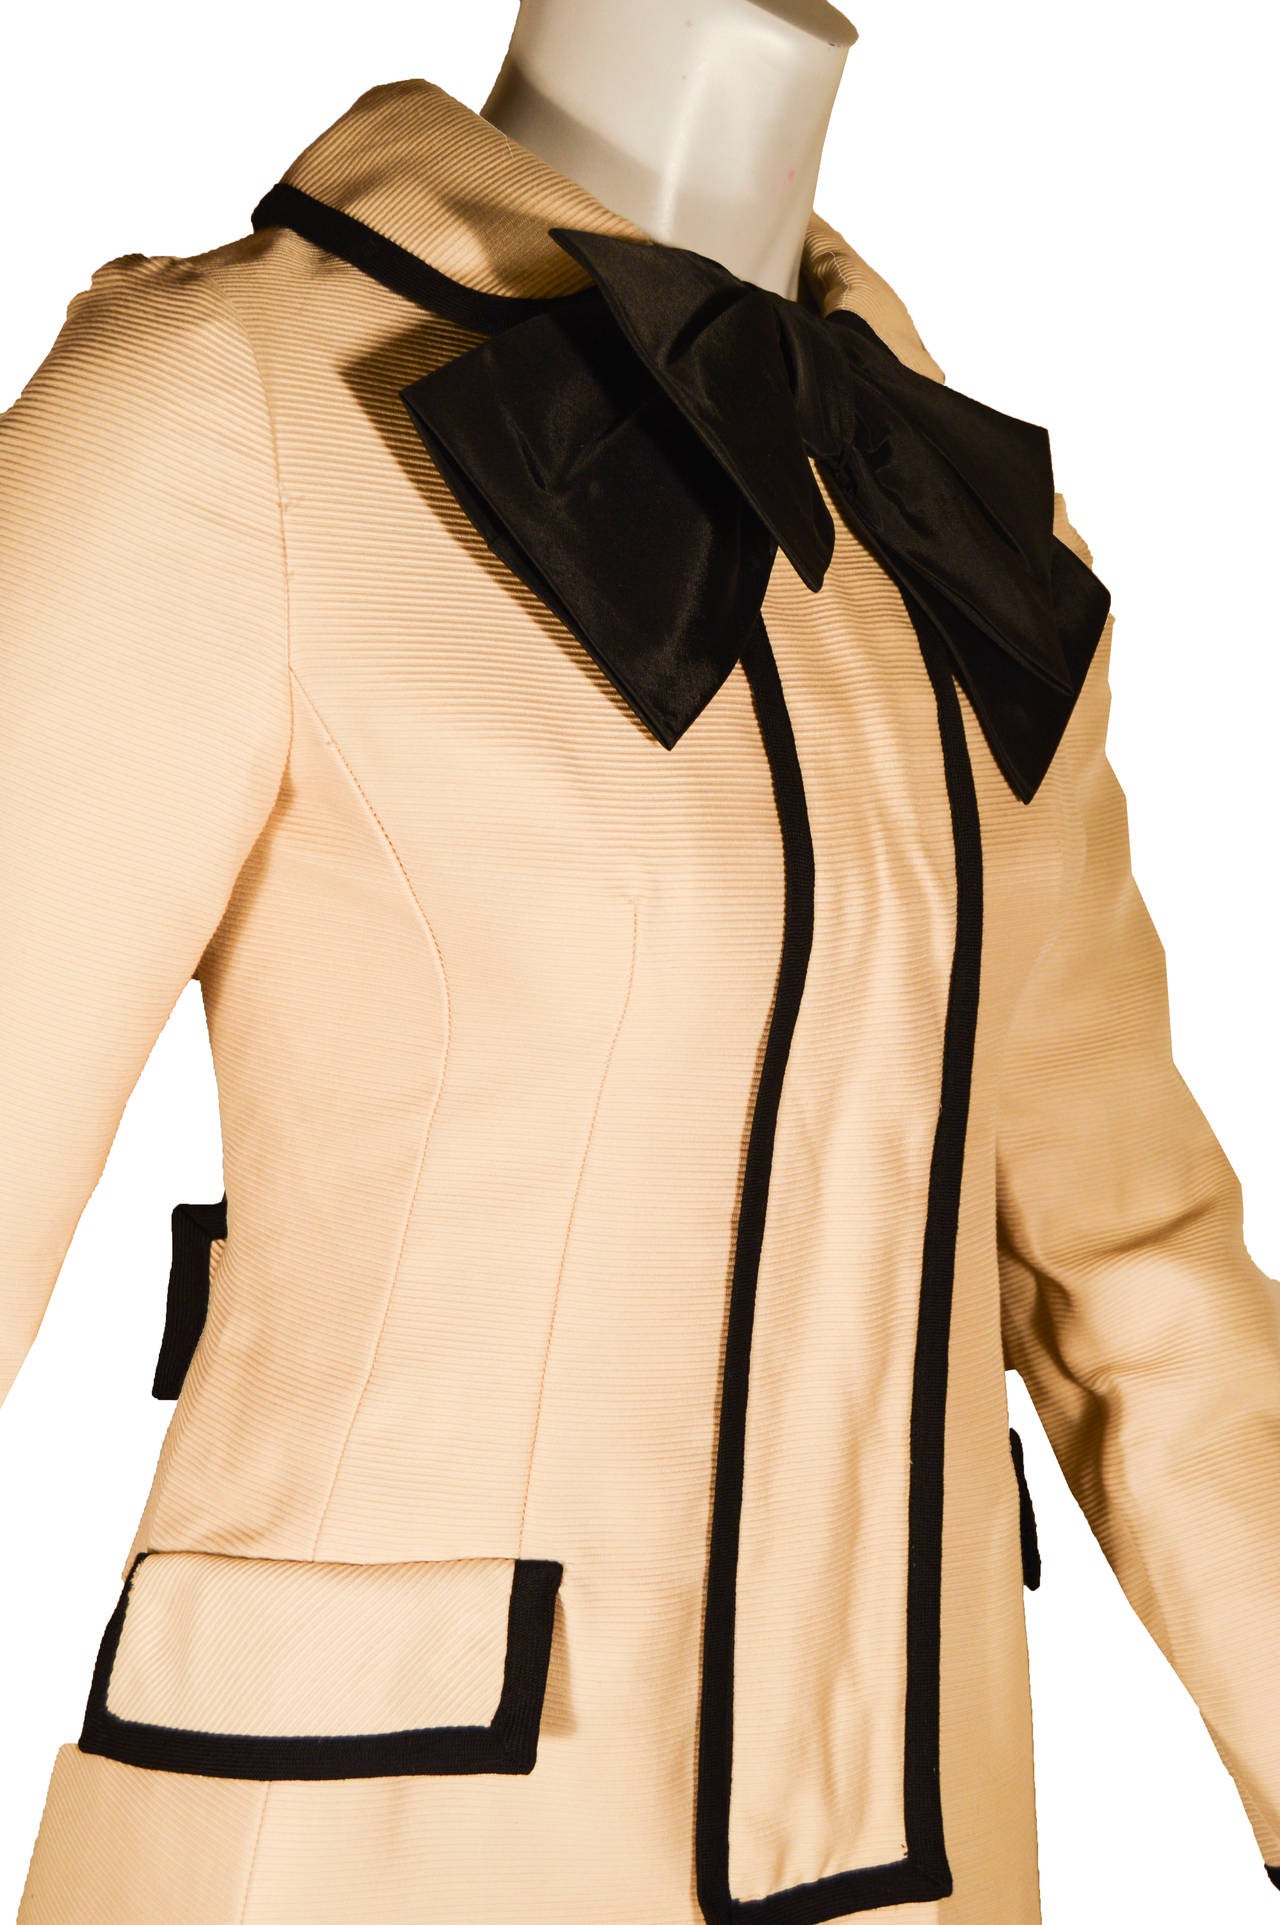 This adorable Mod-era coat in cream has contrast black piping and buttons. There are two faux pockets and an oversized black silk organza bow at the neck. There is a hidden zipper front behind the center placket. The coat is a size small.